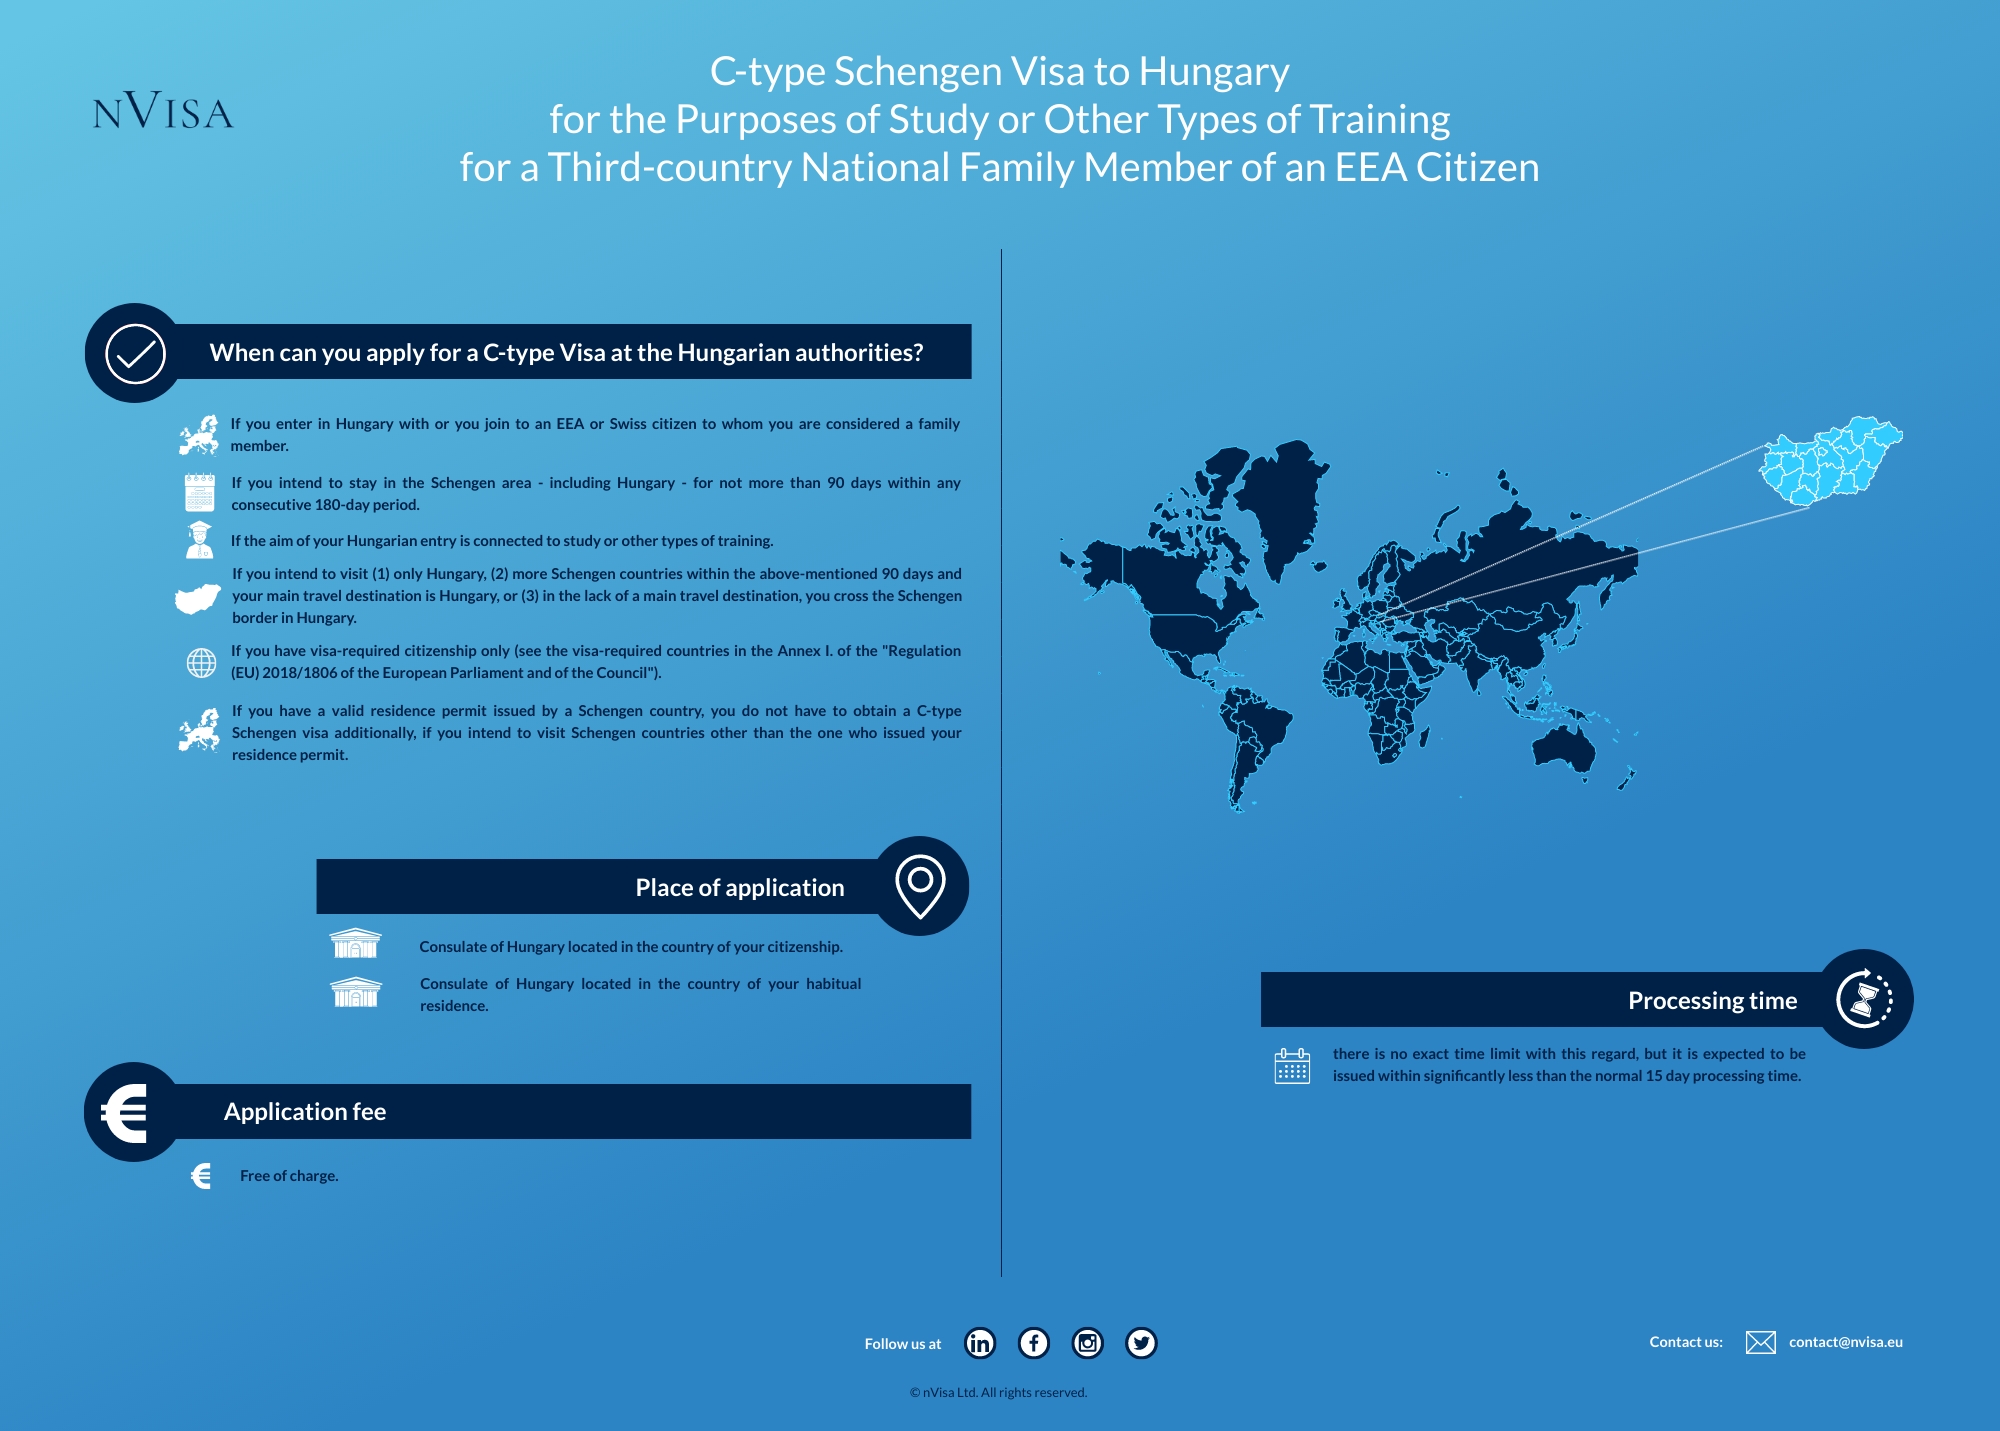 Infographic about immigration requirements and the details of obtaining a C-type Schengen Visa for the purposes of study or other types of training in Hungary for a third-country national Family Member of an EEA Citizen.